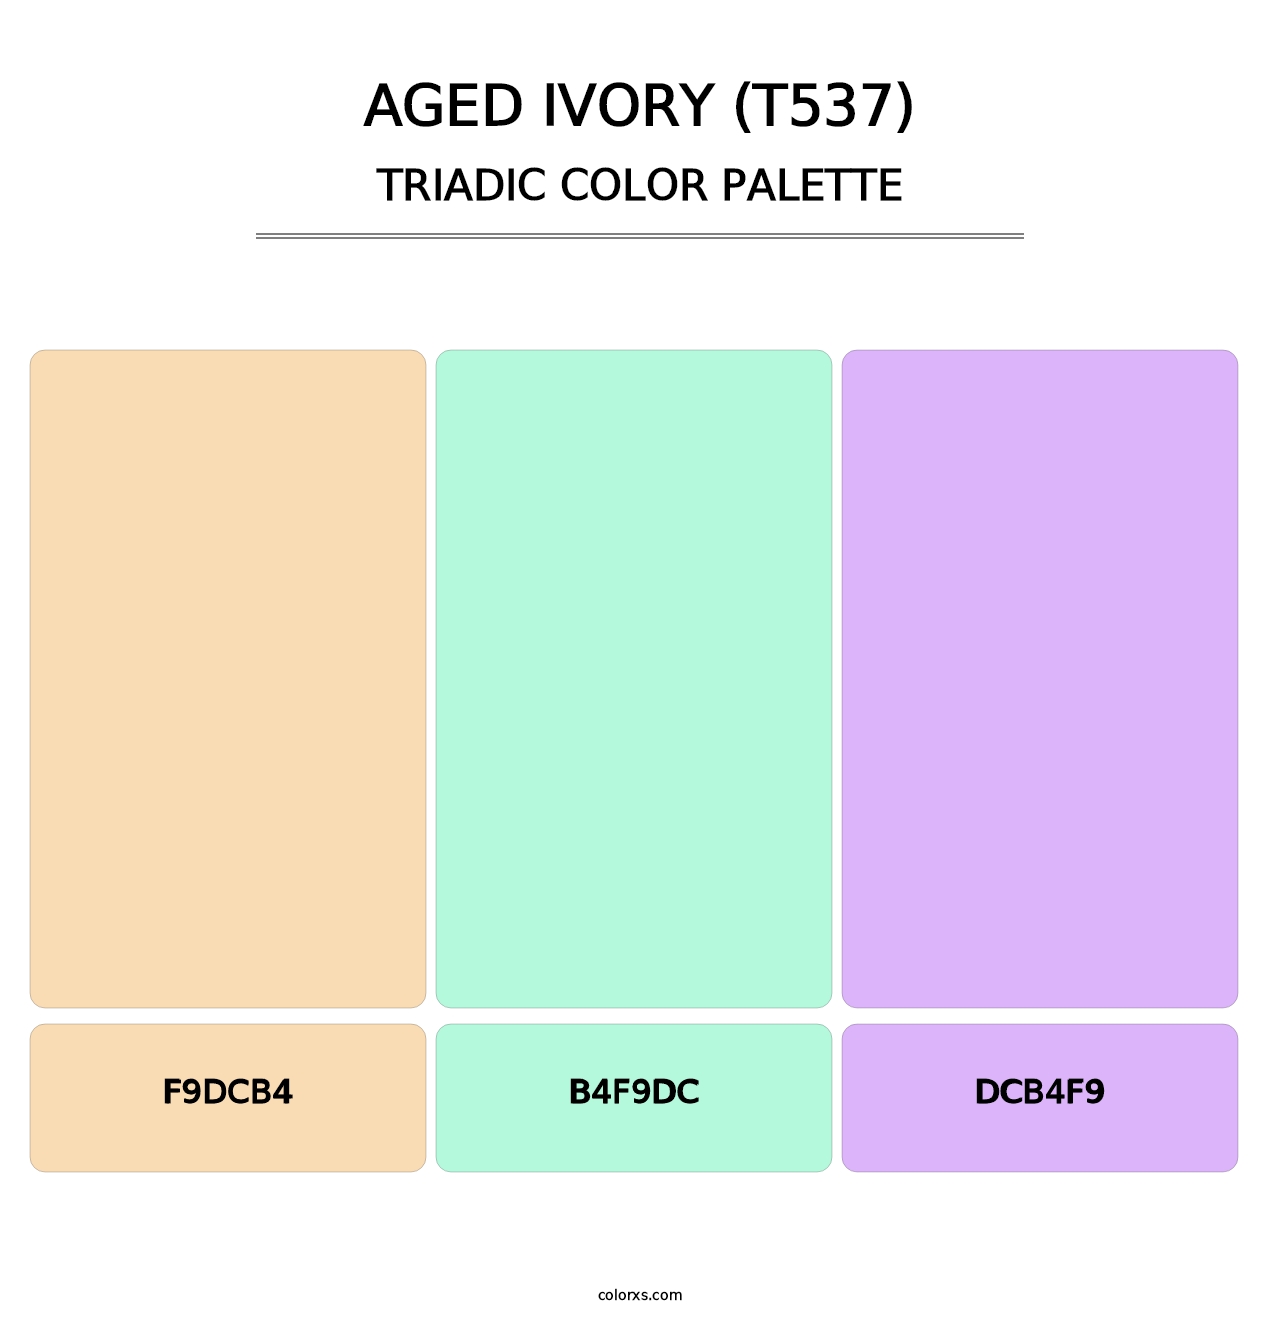 Aged Ivory (T537) - Triadic Color Palette